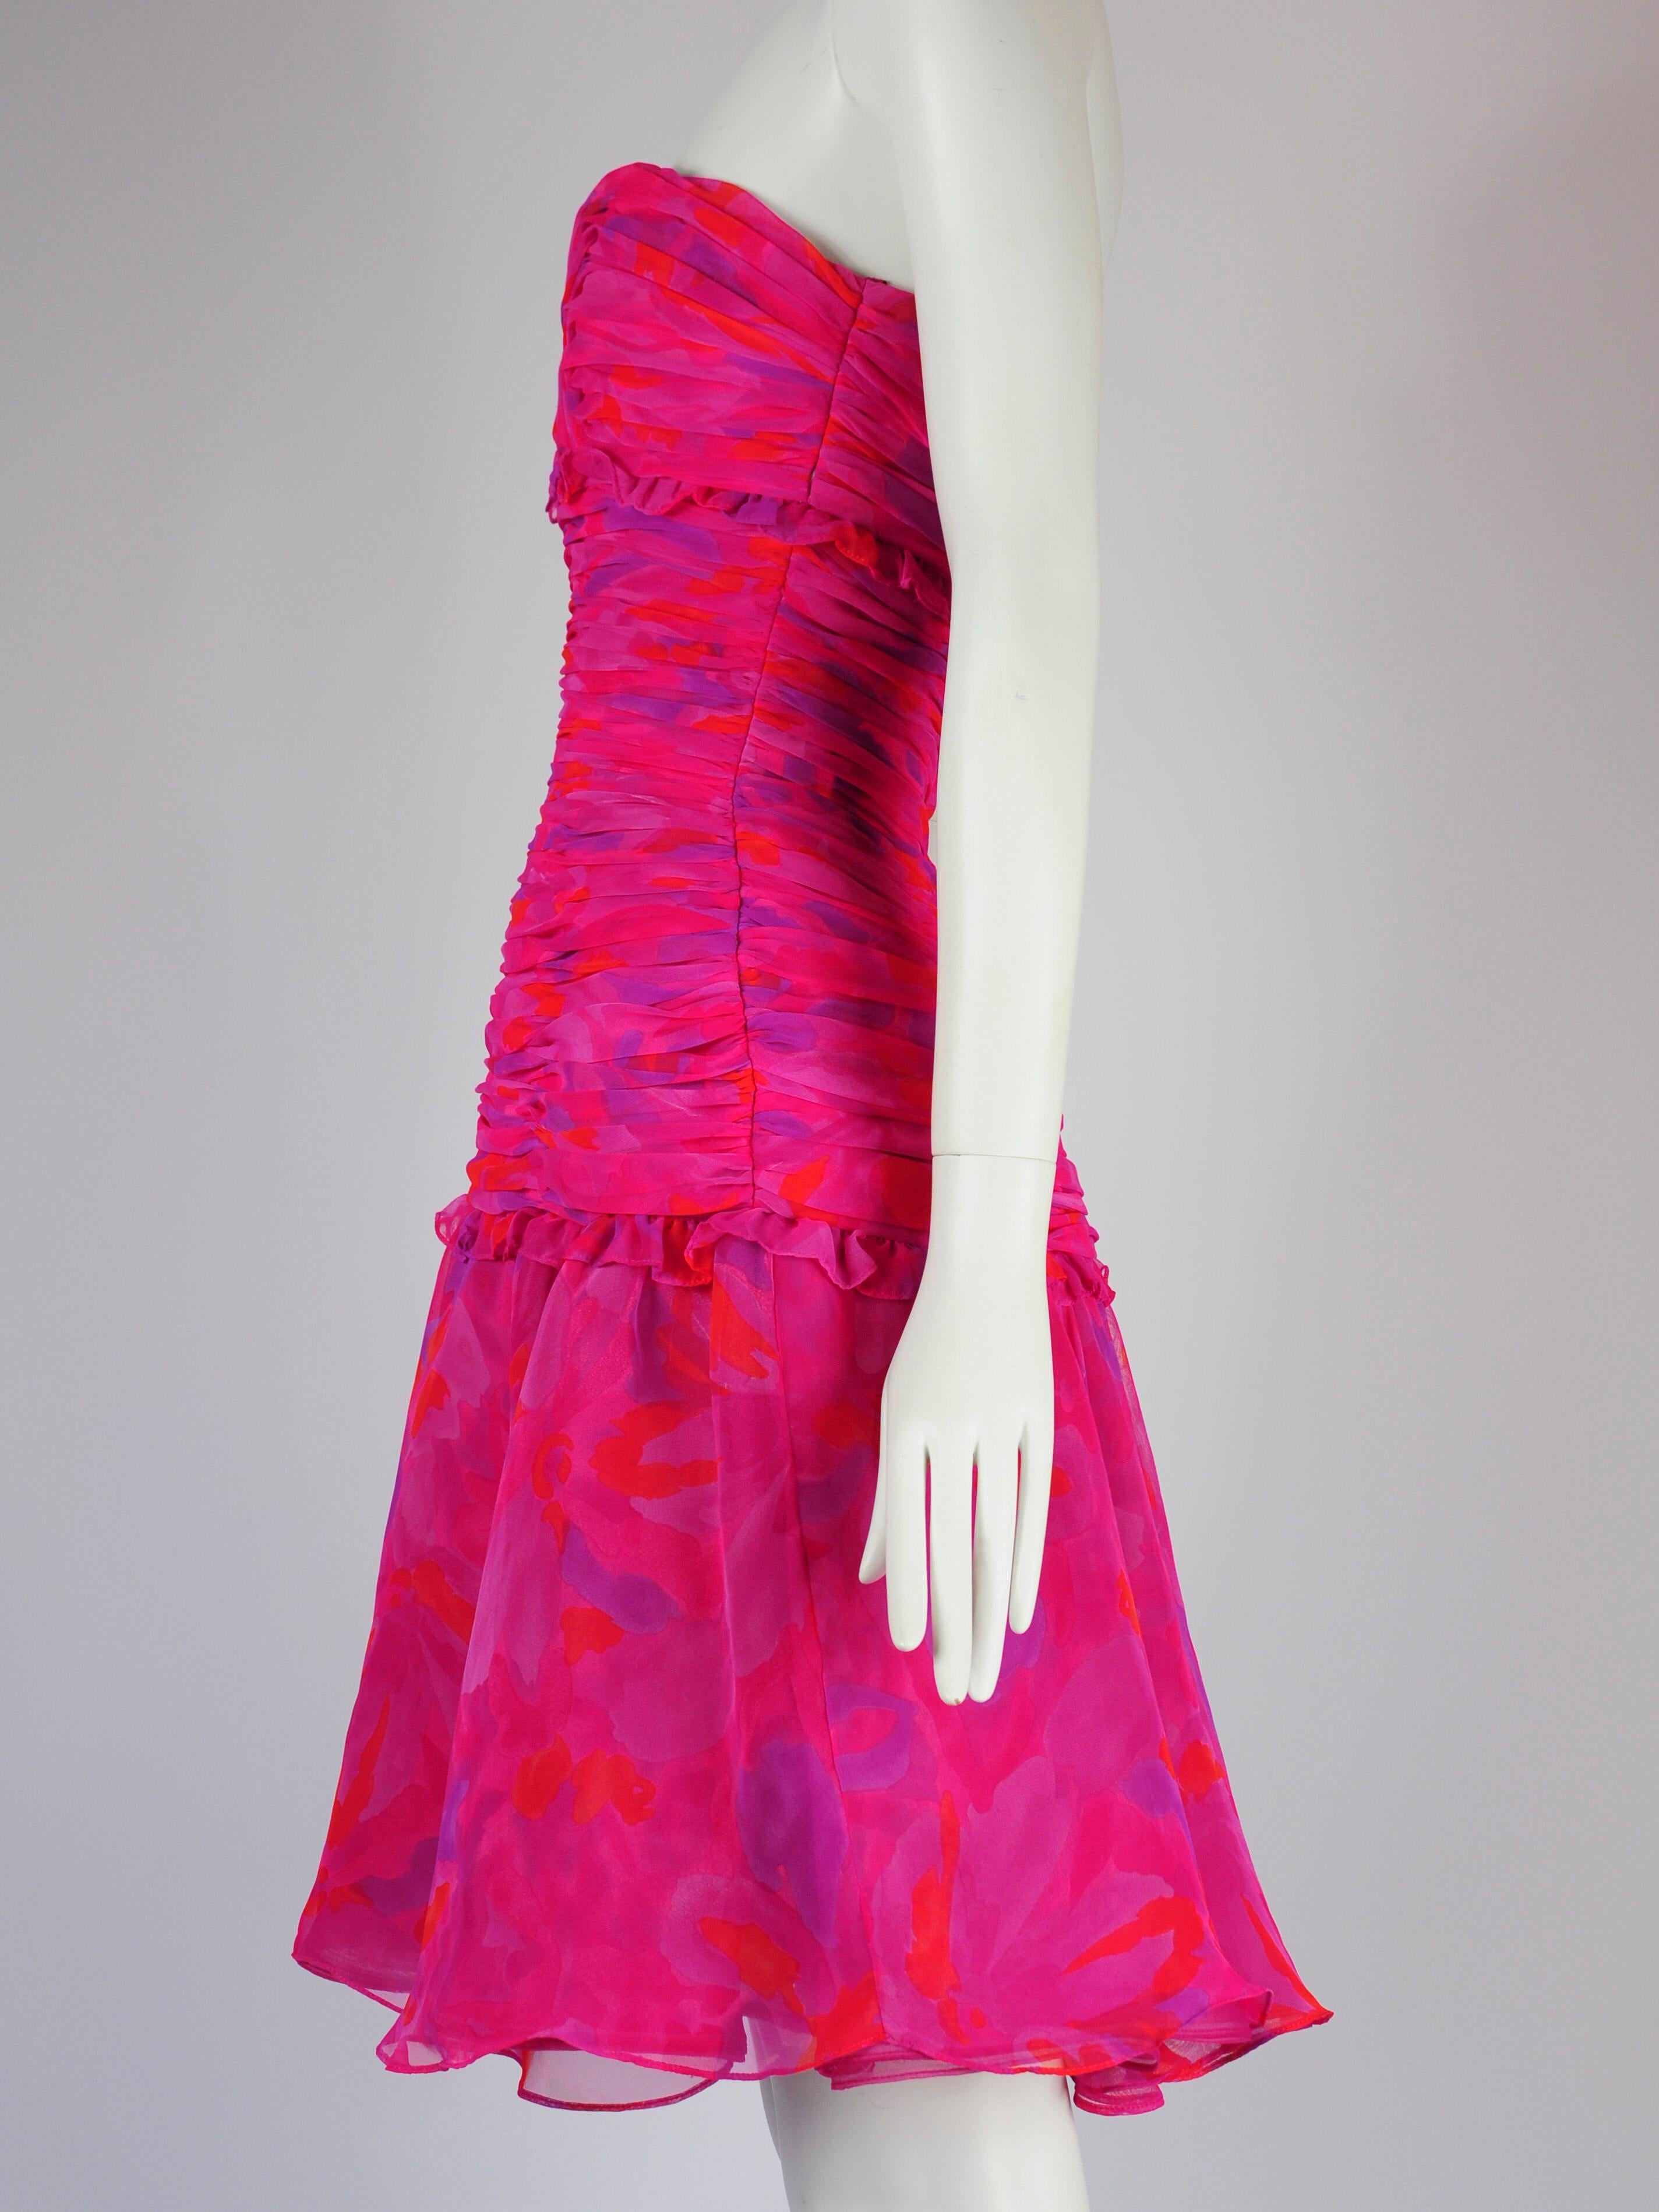 Victor Costa for Saks Fifth Avenue cocktail dress in fuchsia pink with abstract watercolour print. This Victor Costa dress features a ruched bodice and a dropped waistline and a layered skirt. Would work perfectly as a wedding guest dress.

BRAND